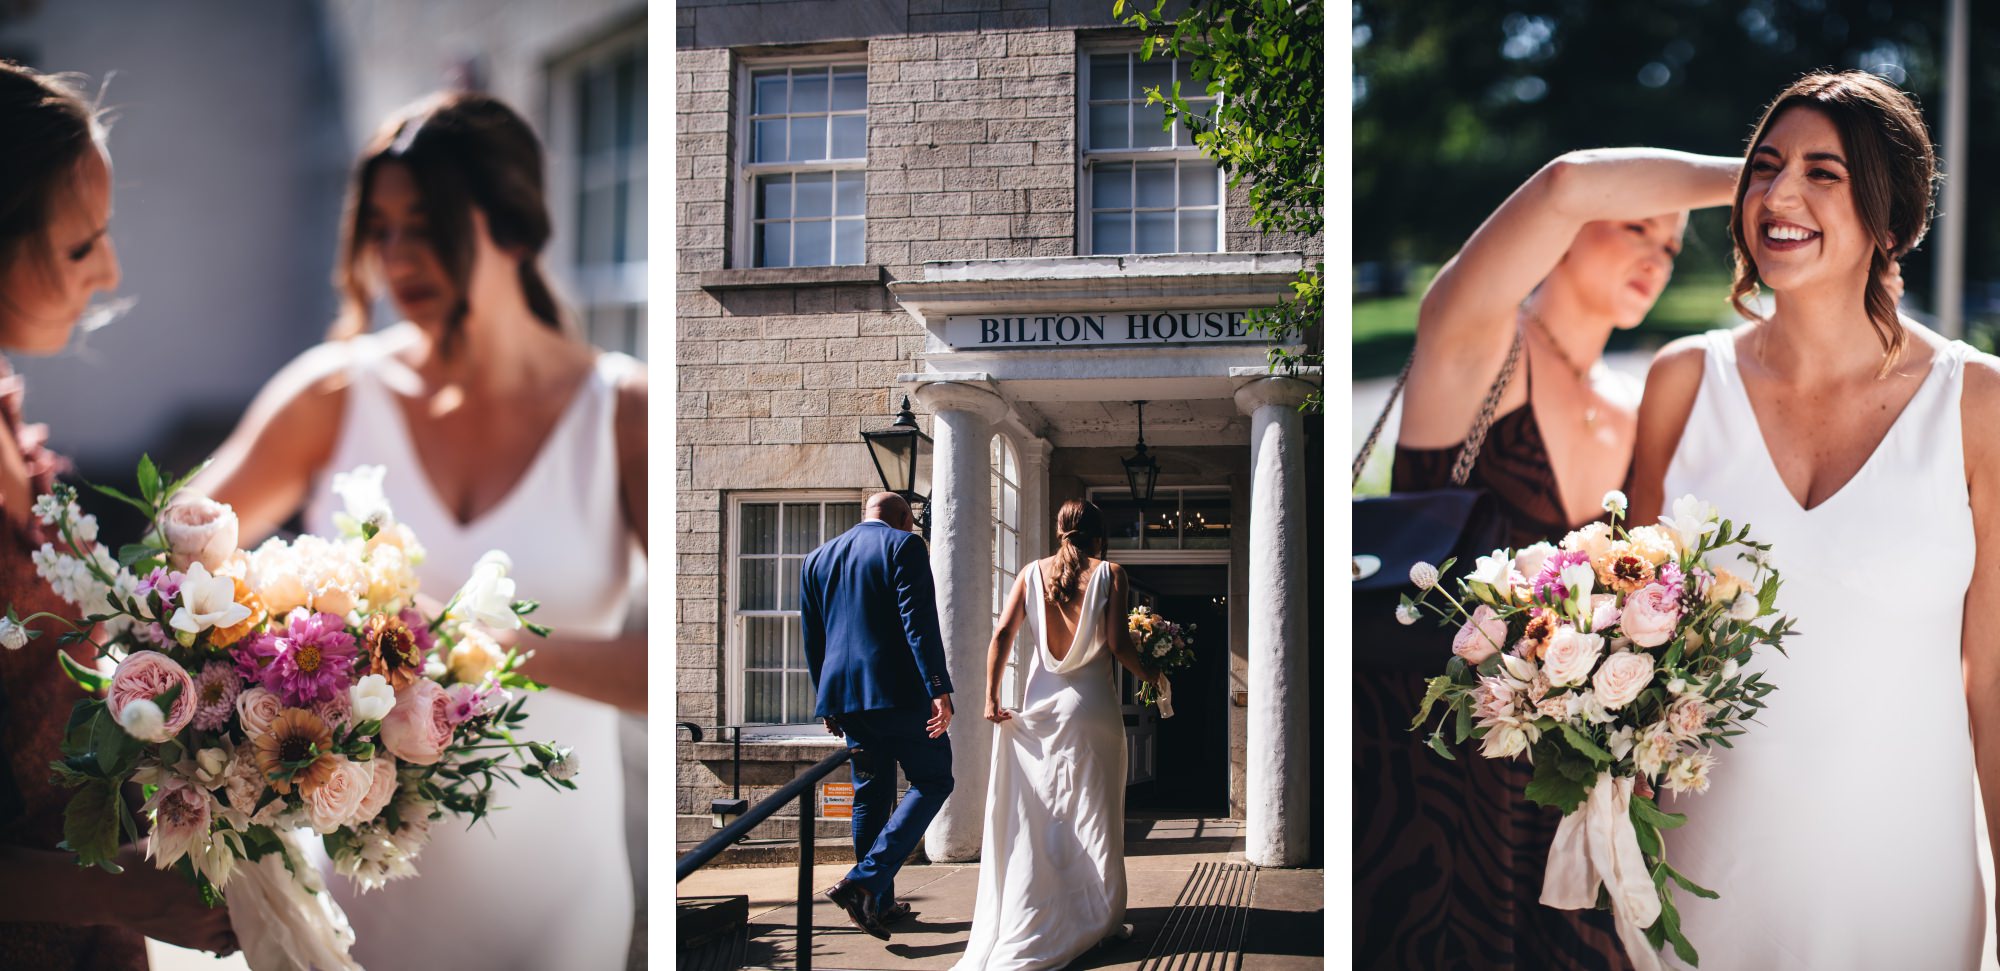 rose and lily bouquet, bride walking into Bilton House with backless wedding dress